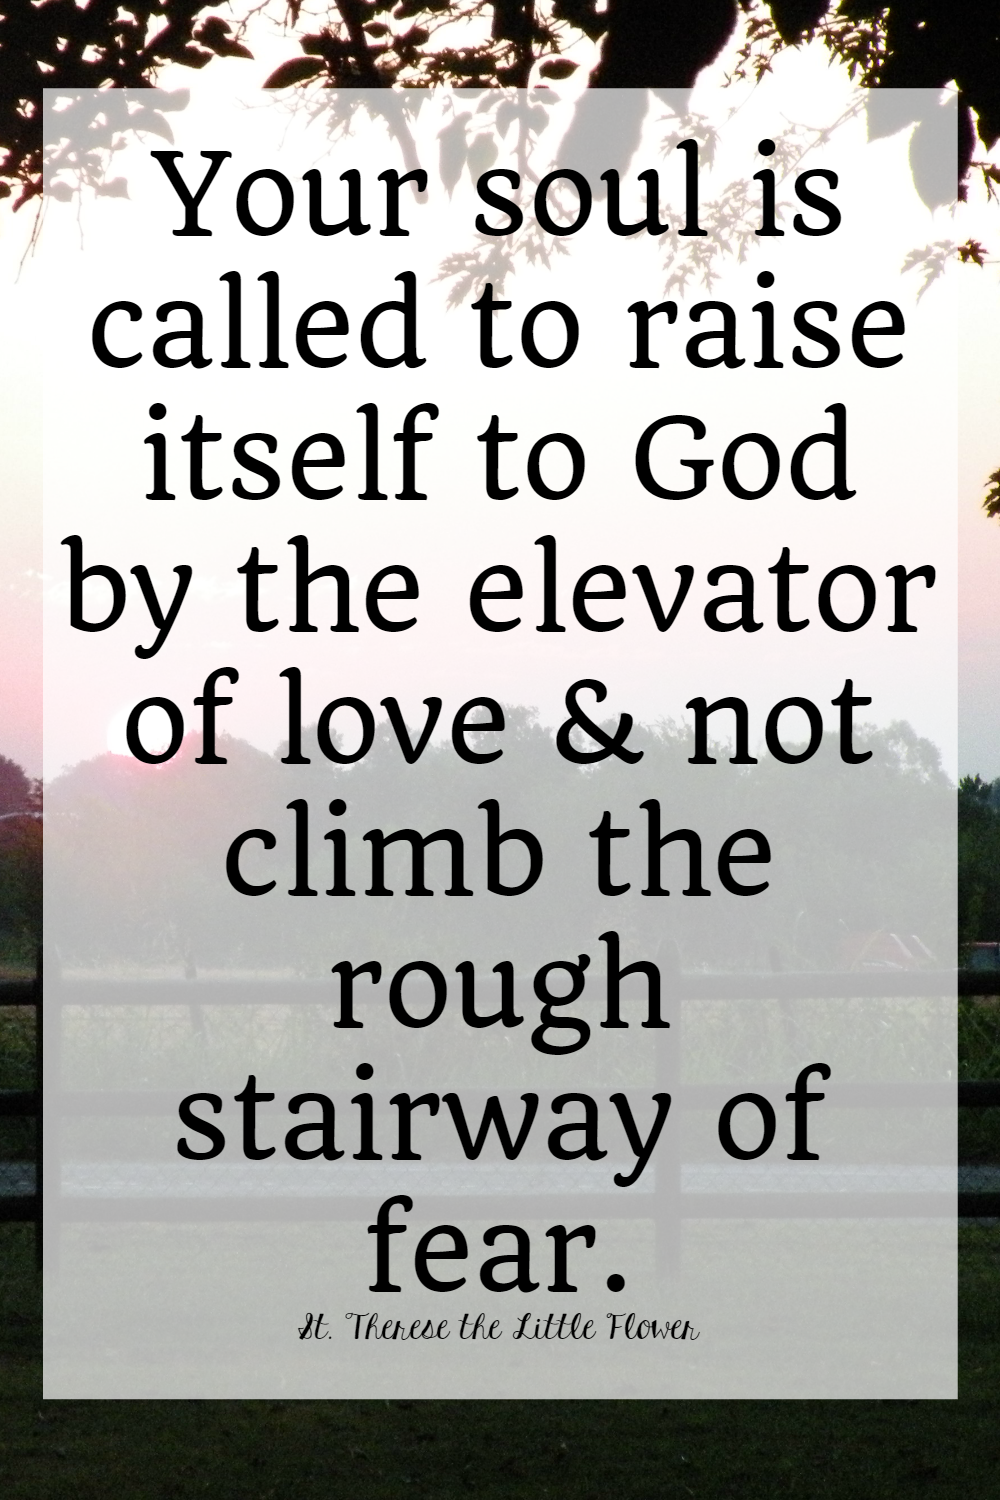 Saints Quotes: The Elevator of Love • The Littlest Way